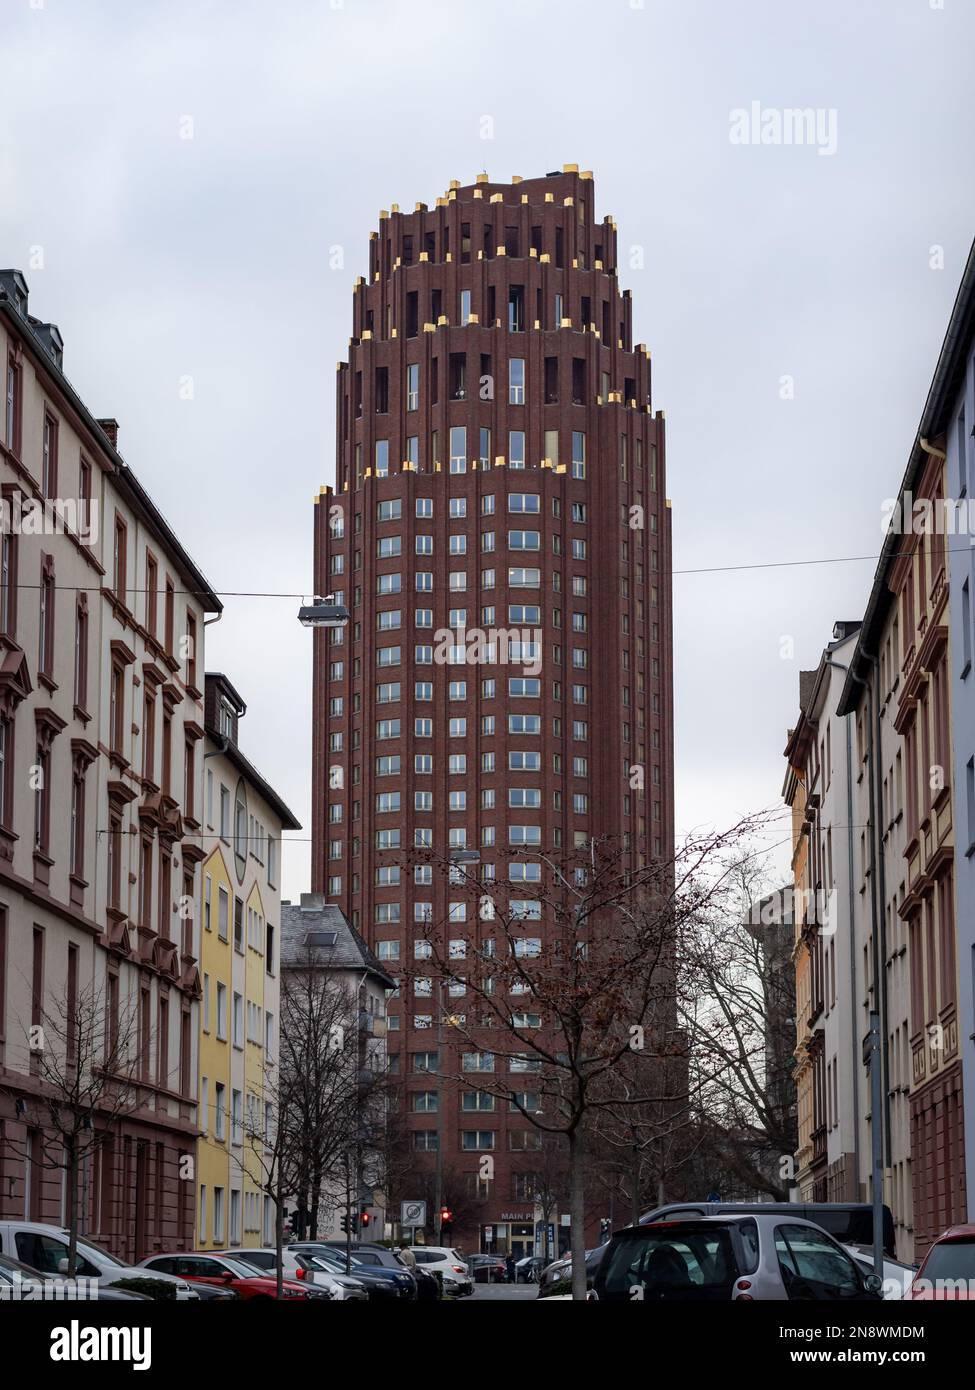 Main Plaza building viewed from the street 'Wasserweg'. High rise building at the end of a road with residential buildings. Architecture by Kollhoff. Stock Photo